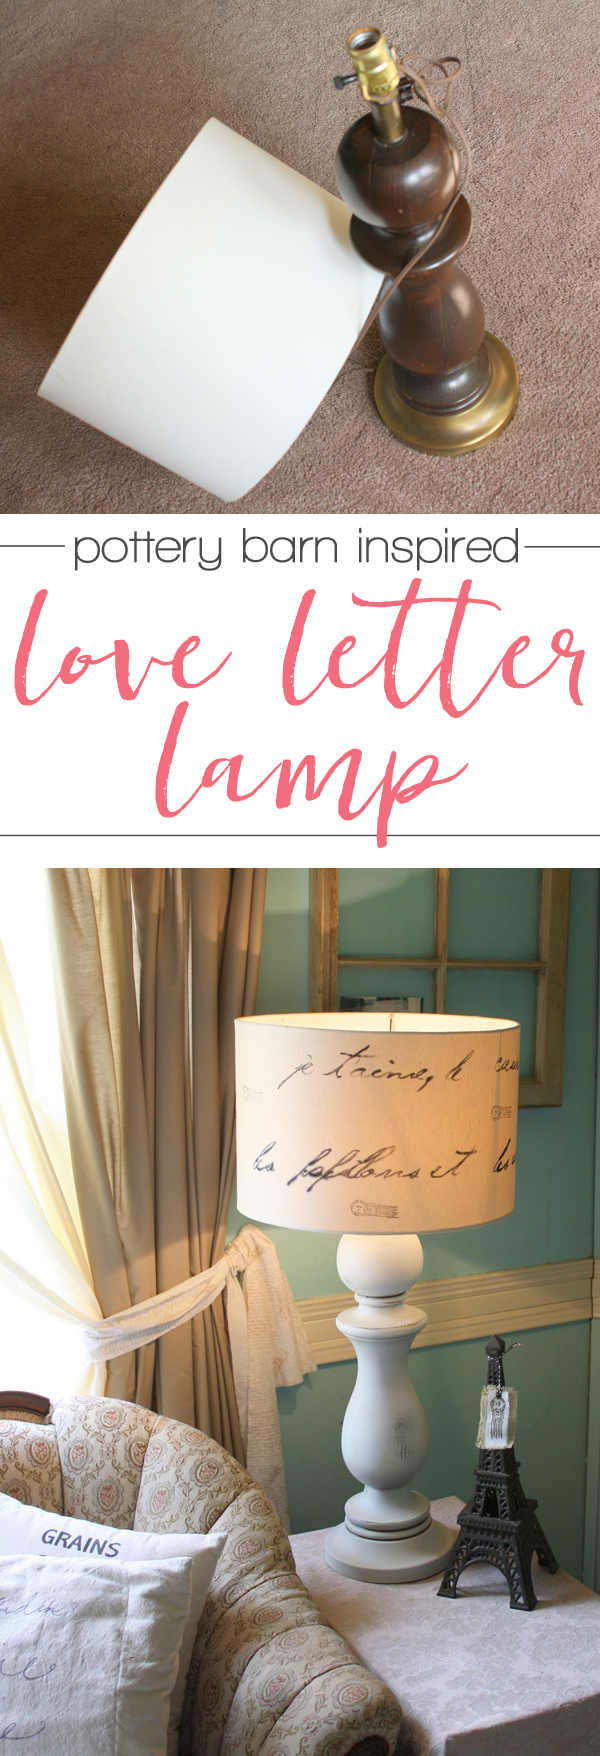 Gorgeous DIY pottery barn inspired love letter lamp - with an actual love letter on the shade. Pinning this for that thrift store lamp I've been saving forever. 